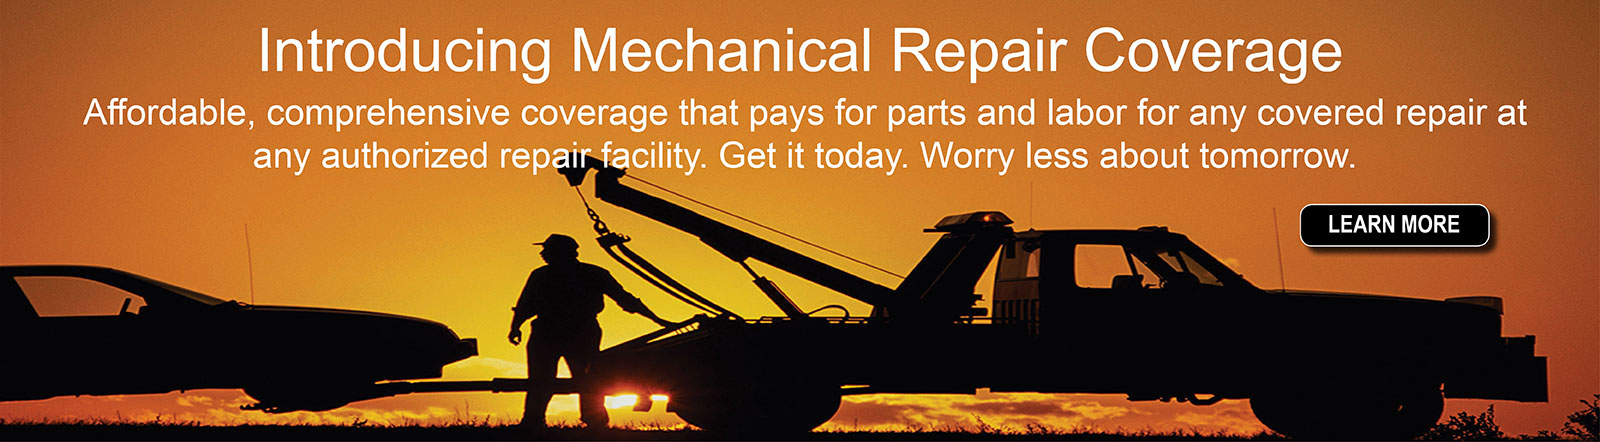 Introducing Mechanical Repair Coverage. Affordable, comprehensive coverage that pays for covered repairs at any authorized repair facility.